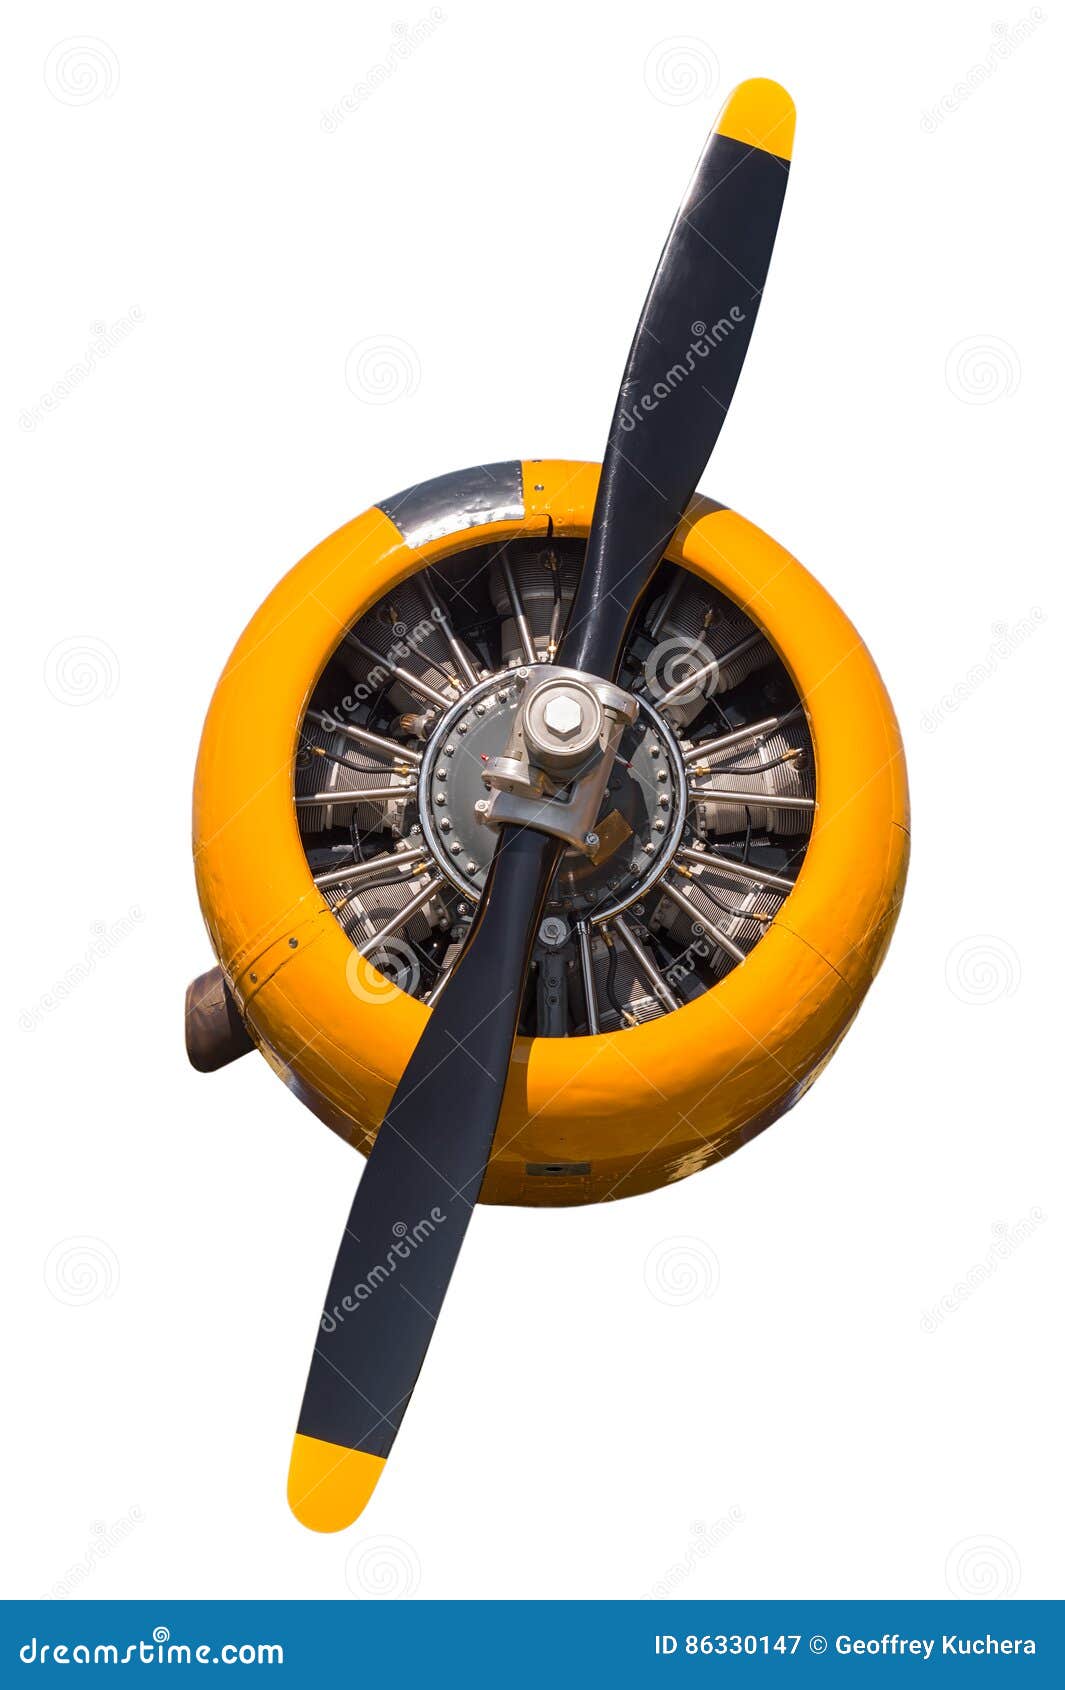 yellow at-6 texan engine and propeller